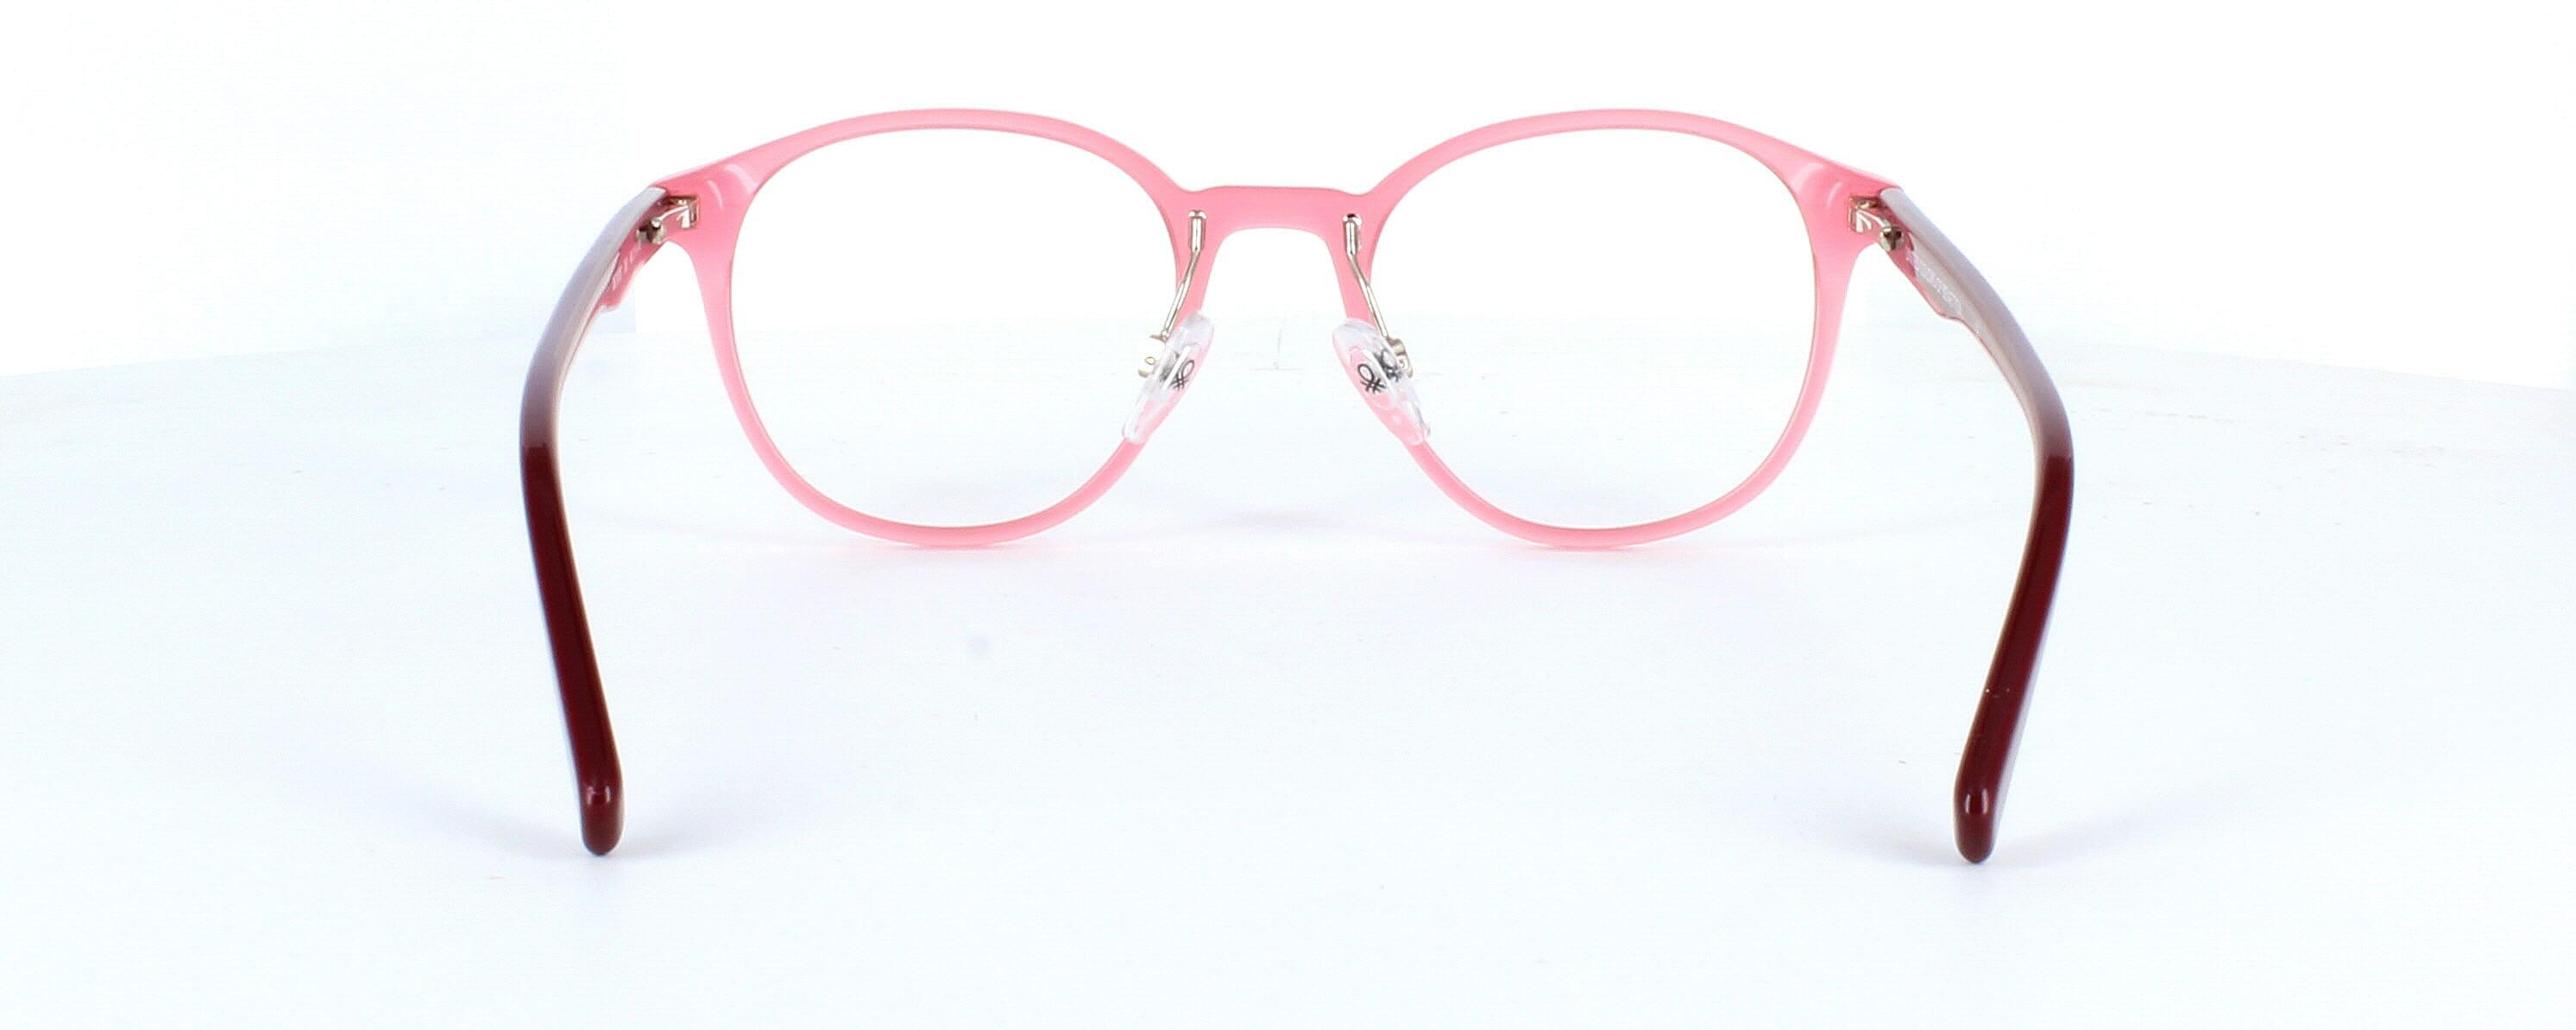 Benetton BEO1007 283 - Women's round plastic crystal pink glasses frame with sprung hinged burgundy arms - image view 4